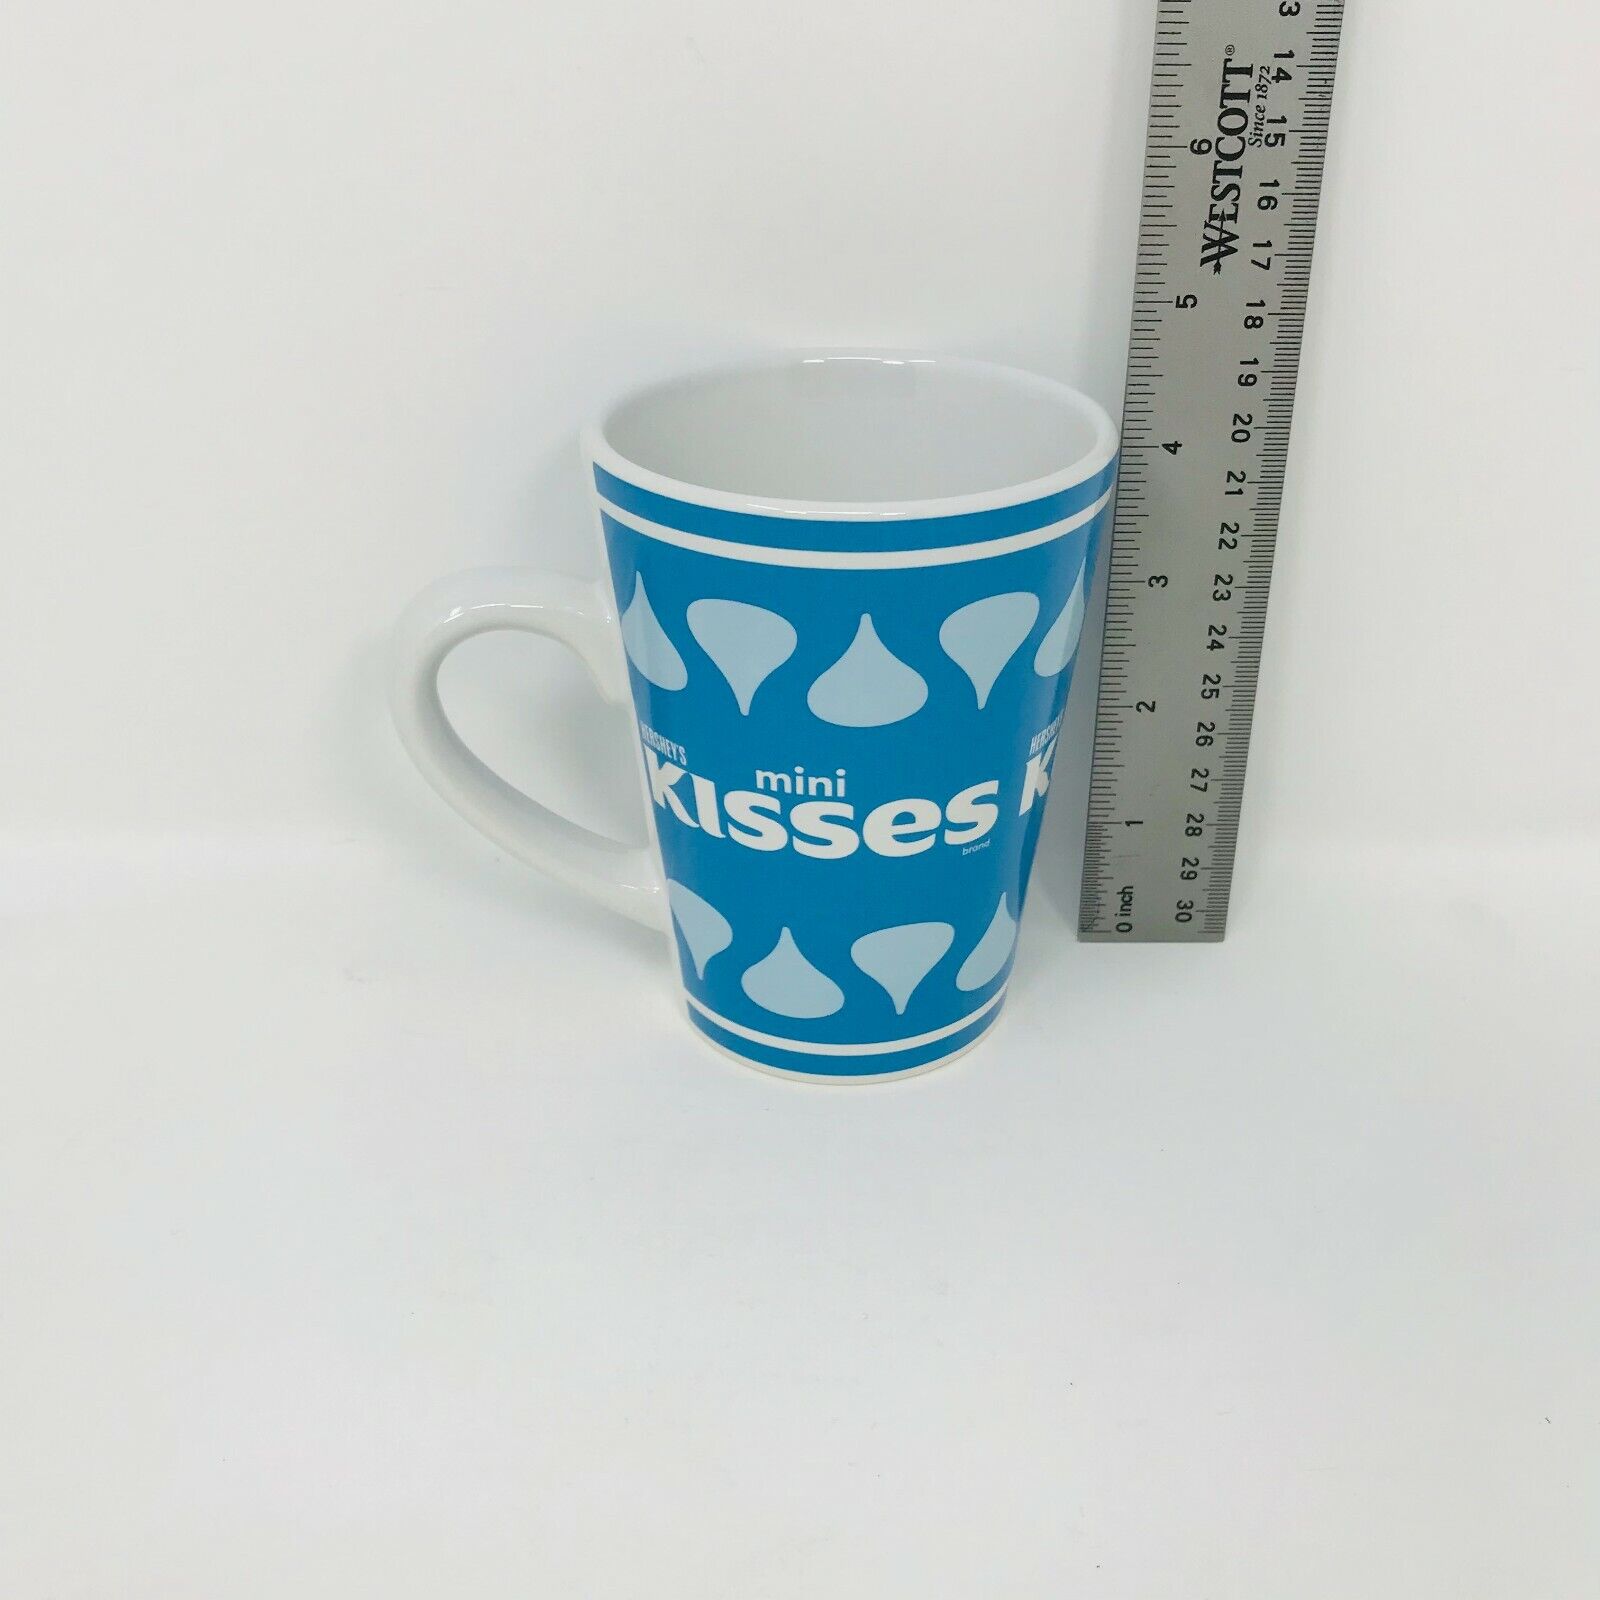 Hershey’s Mini Kisses Blue and white Mug Cup By Galerie microwave safe 